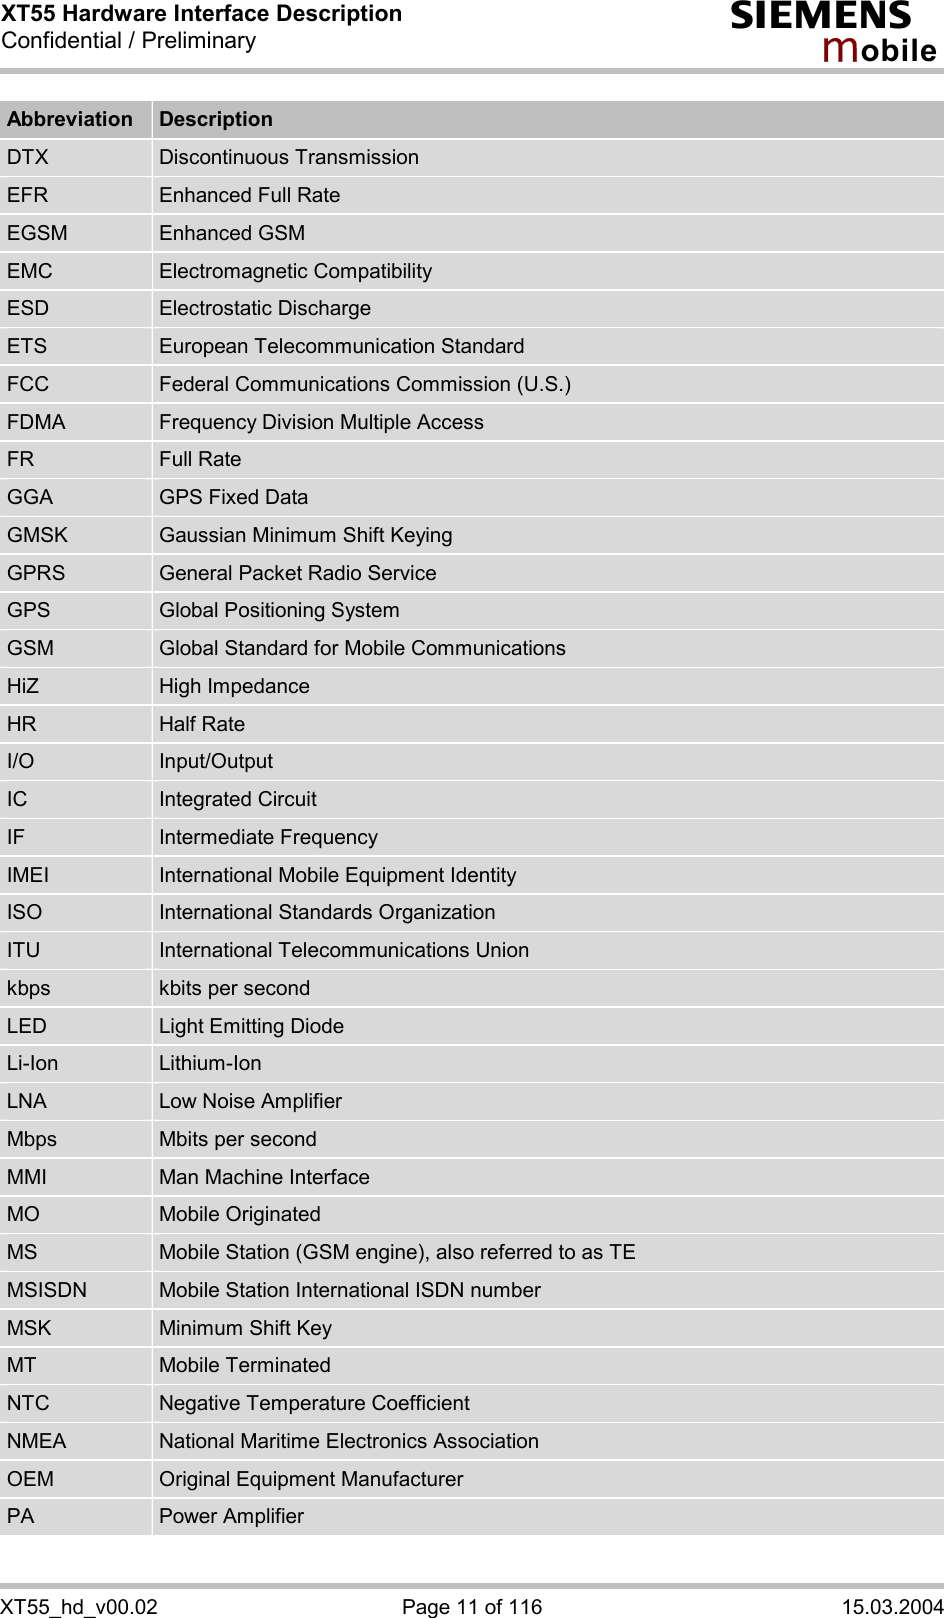 XT55 Hardware Interface Description Confidential / Preliminary s mo b i l e XT55_hd_v00.02  Page 11 of 116  15.03.2004 Abbreviation  Description DTX  Discontinuous Transmission EFR  Enhanced Full Rate EGSM  Enhanced GSM EMC  Electromagnetic Compatibility ESD  Electrostatic Discharge ETS  European Telecommunication Standard FCC  Federal Communications Commission (U.S.) FDMA  Frequency Division Multiple Access FR  Full Rate GGA  GPS Fixed Data GMSK  Gaussian Minimum Shift Keying GPRS  General Packet Radio Service GPS  Global Positioning System GSM  Global Standard for Mobile Communications HiZ  High Impedance HR  Half Rate I/O  Input/Output IC  Integrated Circuit IF  Intermediate Frequency IMEI  International Mobile Equipment Identity ISO  International Standards Organization ITU  International Telecommunications Union kbps  kbits per second LED  Light Emitting Diode Li-Ion  Lithium-Ion LNA  Low Noise Amplifier Mbps  Mbits per second MMI  Man Machine Interface MO  Mobile Originated MS  Mobile Station (GSM engine), also referred to as TE MSISDN  Mobile Station International ISDN number MSK  Minimum Shift Key MT  Mobile Terminated NTC  Negative Temperature Coefficient NMEA  National Maritime Electronics Association OEM  Original Equipment Manufacturer PA  Power Amplifier 